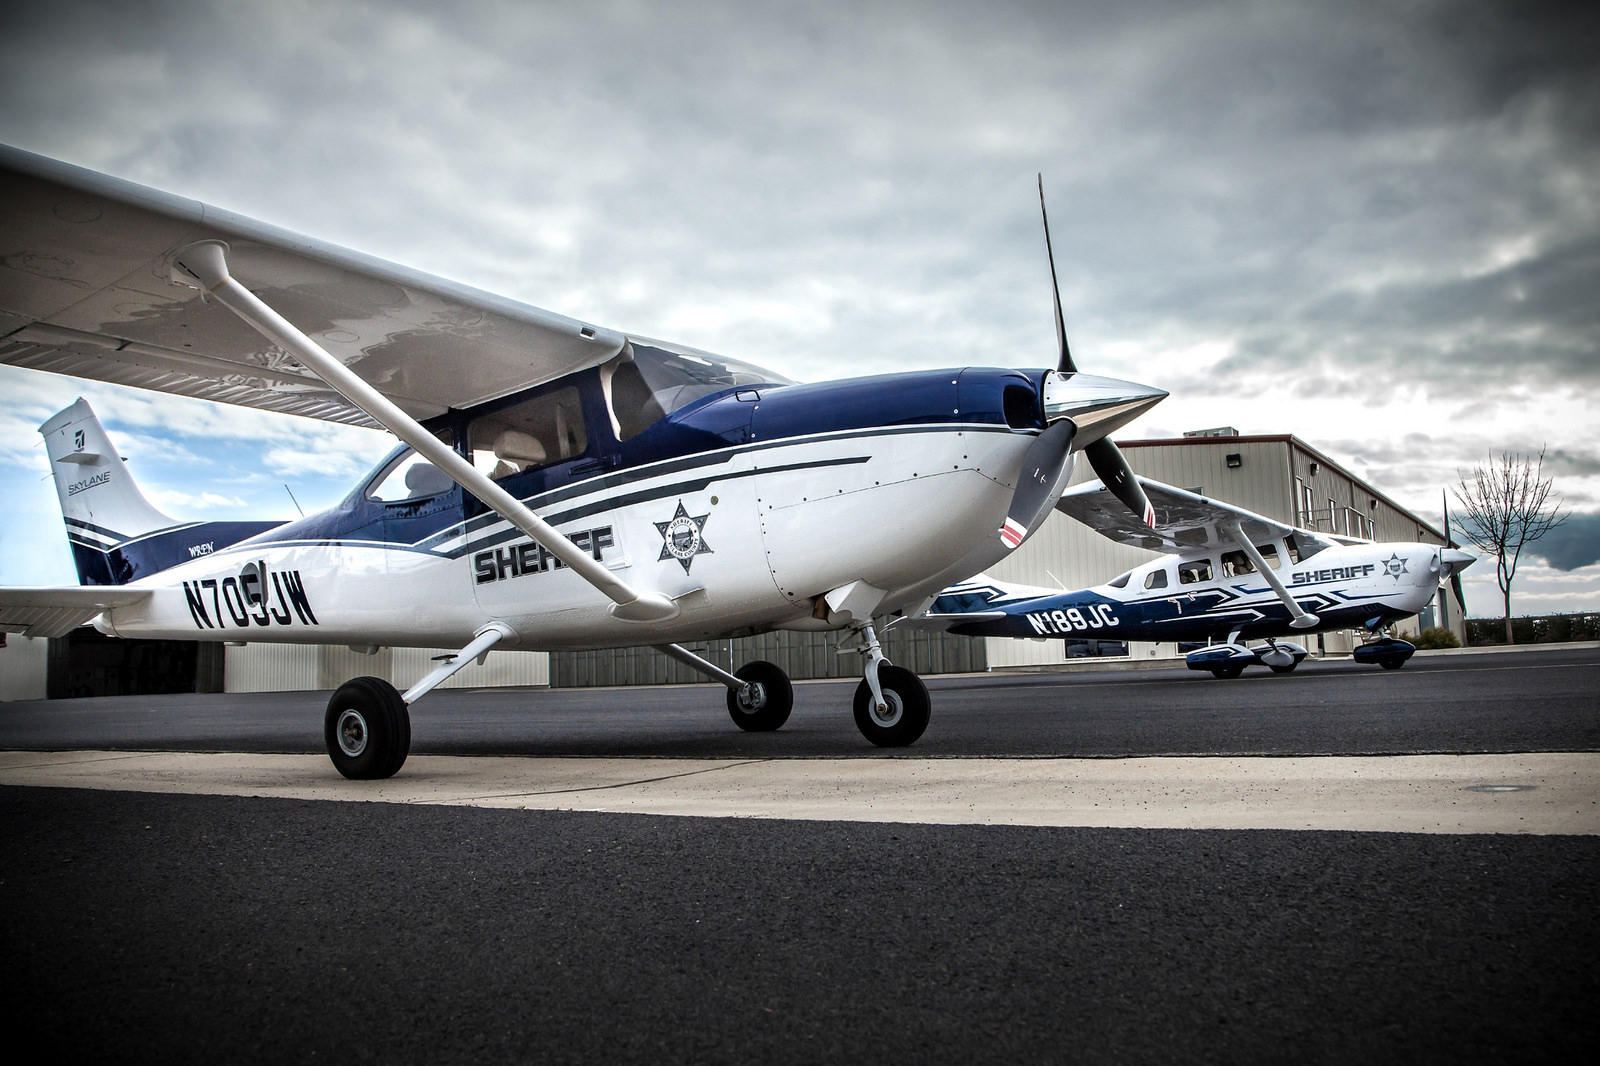 The Sheriff's two airplanes sit side by side at the Porterville Airport: Wren, at left, and Tribute, at right. Wren is a Cessna 182 which seats four, and Tribute is a Cessna 206 which seats six. 